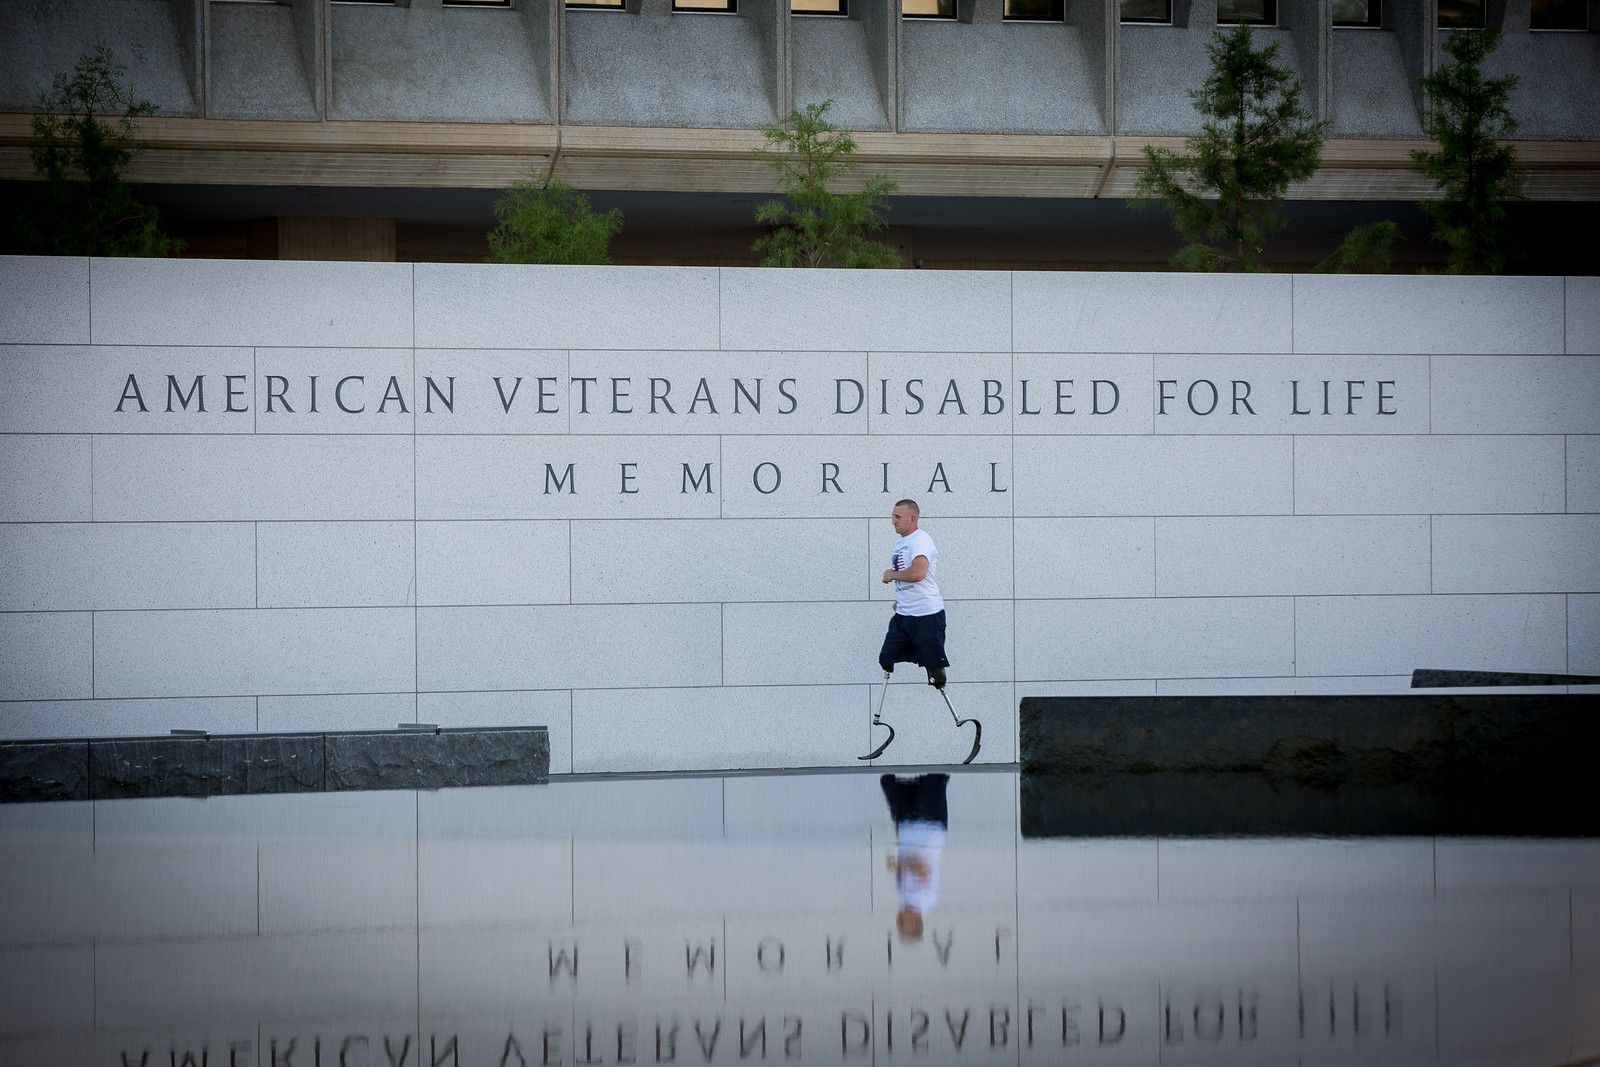 Rob Jones trains for his 31 marathons in 31 days at the American Veterans Disabled for Life Memorial, Washington DC. (Ivan Kander and Joe Tyler)